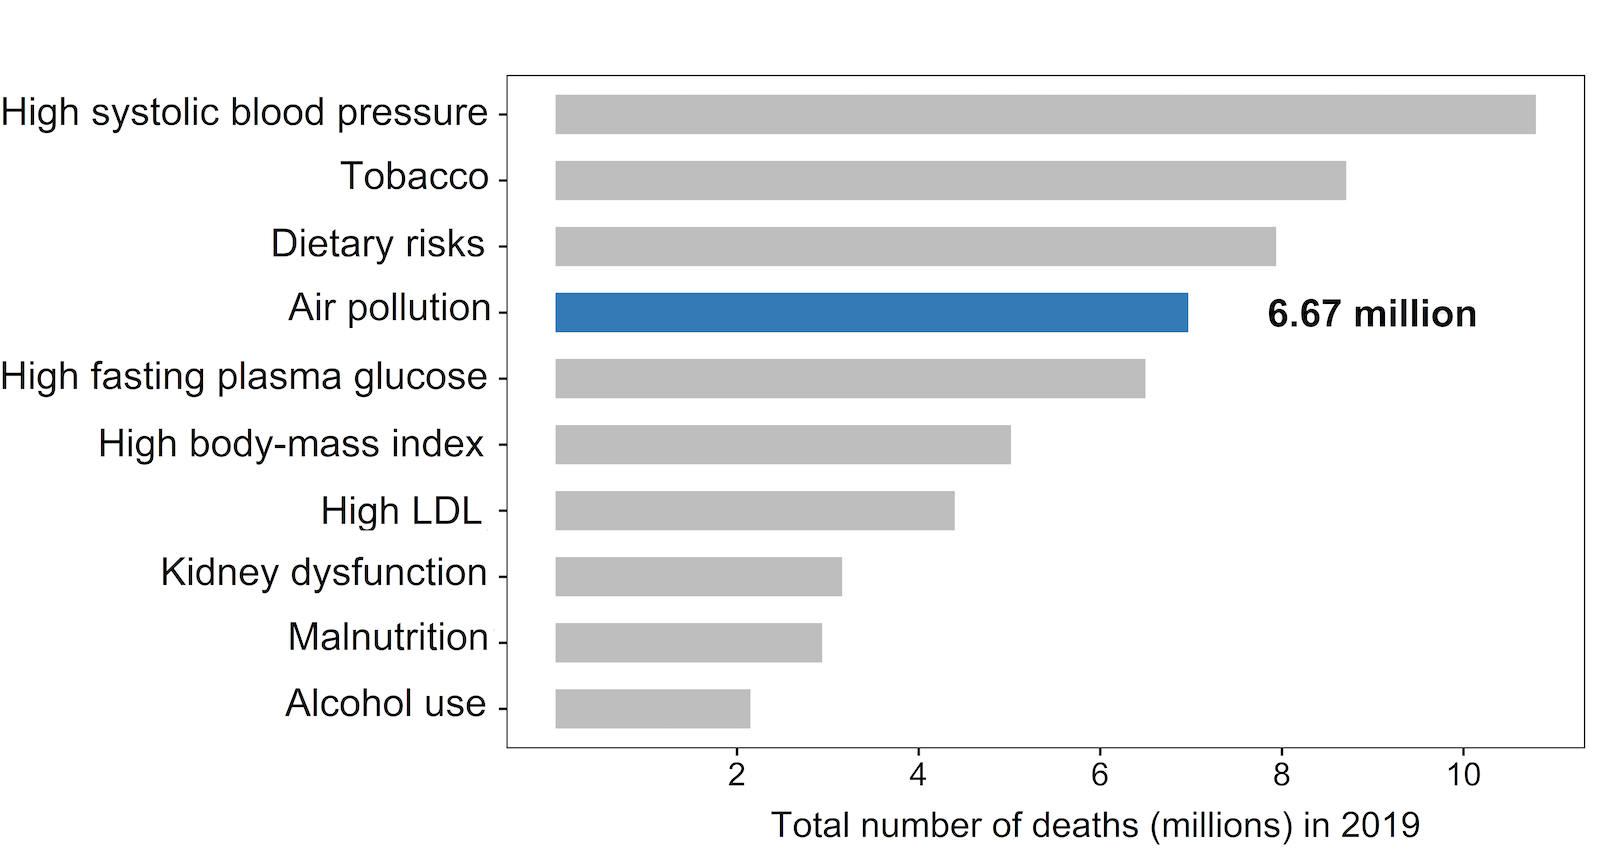 Figure N. Global ranking of risk factors by total deaths from all causes in 2019.